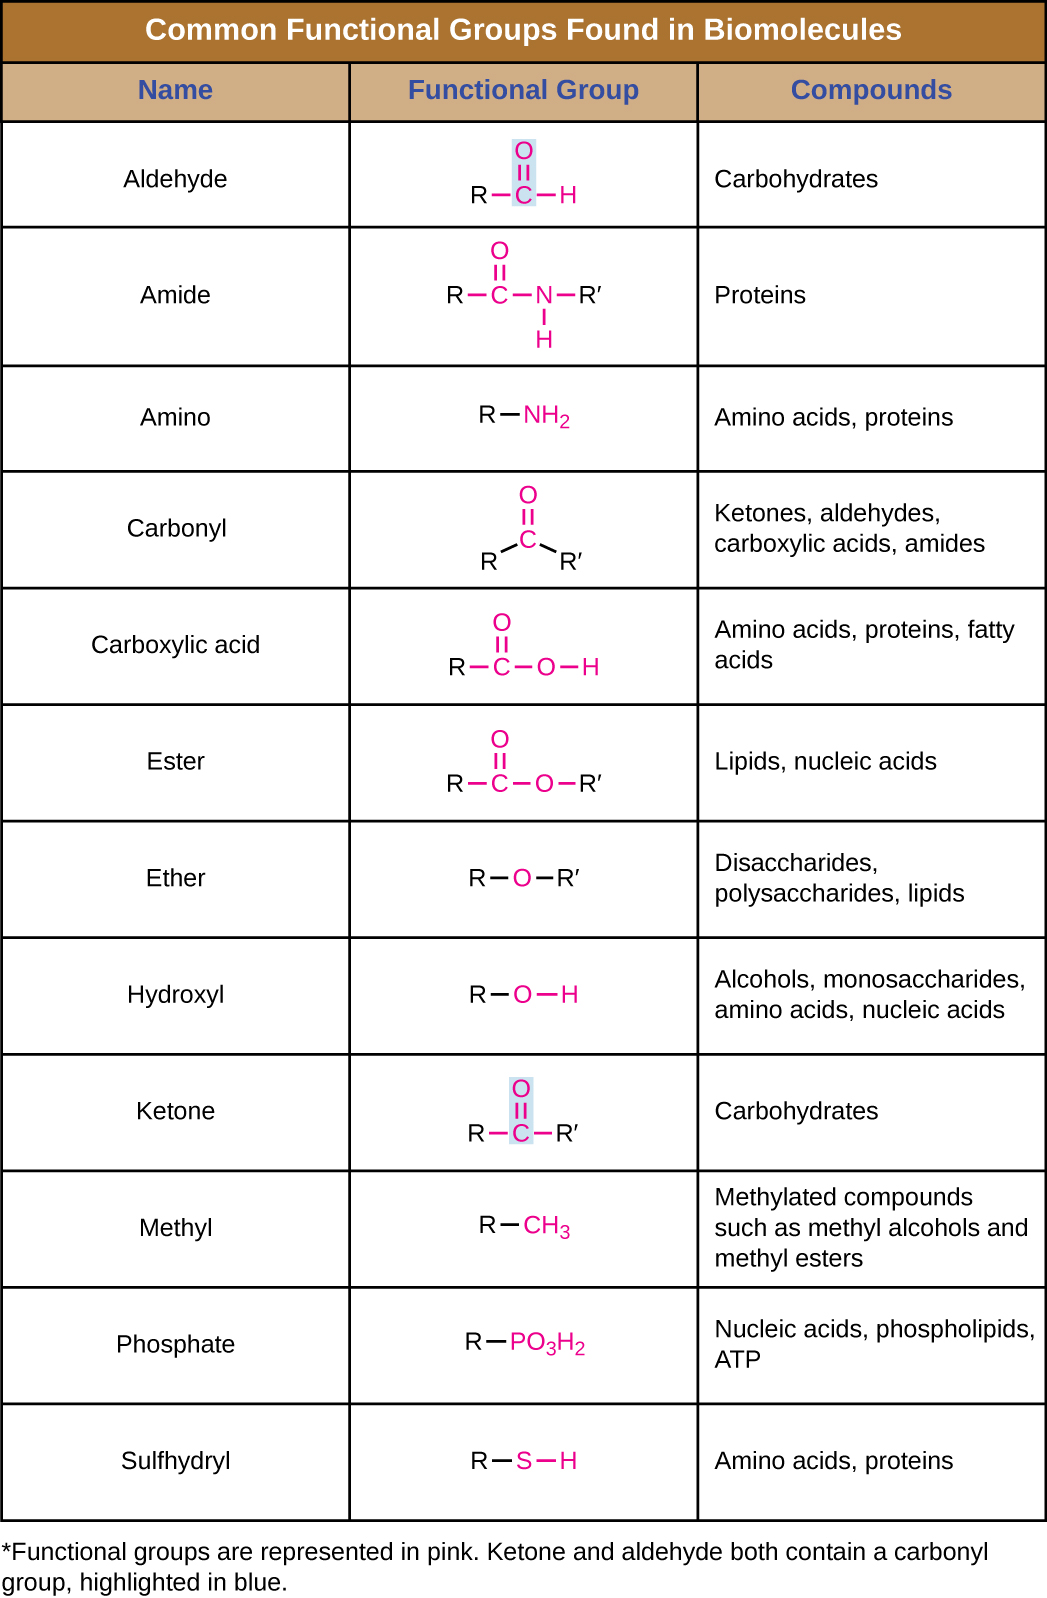 Table titled: Common functional groups found in biomolecules; 3 columns, name, functional group and class of compound.  Aldehyde has a red C  double bonded O and an H; the C is also bound to a black R. This is found in carbohydrates. Amine has a red C double bonded to an O and single bonded to an NH. The C and the N are each also bound to a black R. This is found in proteins. Amino has a red NH2 bound to a black R. This is found in amino acids and proteins. Phosphate has a red PO3H2; the P is also bound to a black R. This is found in nucleic acids, phospholipids and ATP. Carbonyl has a red C double bonded to an O; the C is also bound to 2 black Rs. This is found in ketones, aldehydes, carboxylic acids, amides. Carboxylic acid has a red C double bonded to an O and to an OH; the C is also bound to a black R. This is found in amino acids, proteins, and fatty acids. Ester has a red C double bonded to an O and single bonded to another O. The C is bound to a black R and the single bonded O is also bound to a black R. This is found in lipids and nucleic acids. Ether has a red O bound to 2 black Rs. This is found in disaccharides, polysaccharides, and lipids. Hydroxyl has a red OH bound to a black R; this is found in alcohols, monosaccharides, amino acids, and nucleic acids. Ketone has a red C double bonded to an O; the C is also bound to 2 black Rs. This is found in carbohydrates. Methyl has a red CH3 bound to a black R. This is found in methylated compounds such as methyl alcohols and methyl esters. Sulfhydryl has a black R bound to a red SH. This is found in amino acids and proteins.